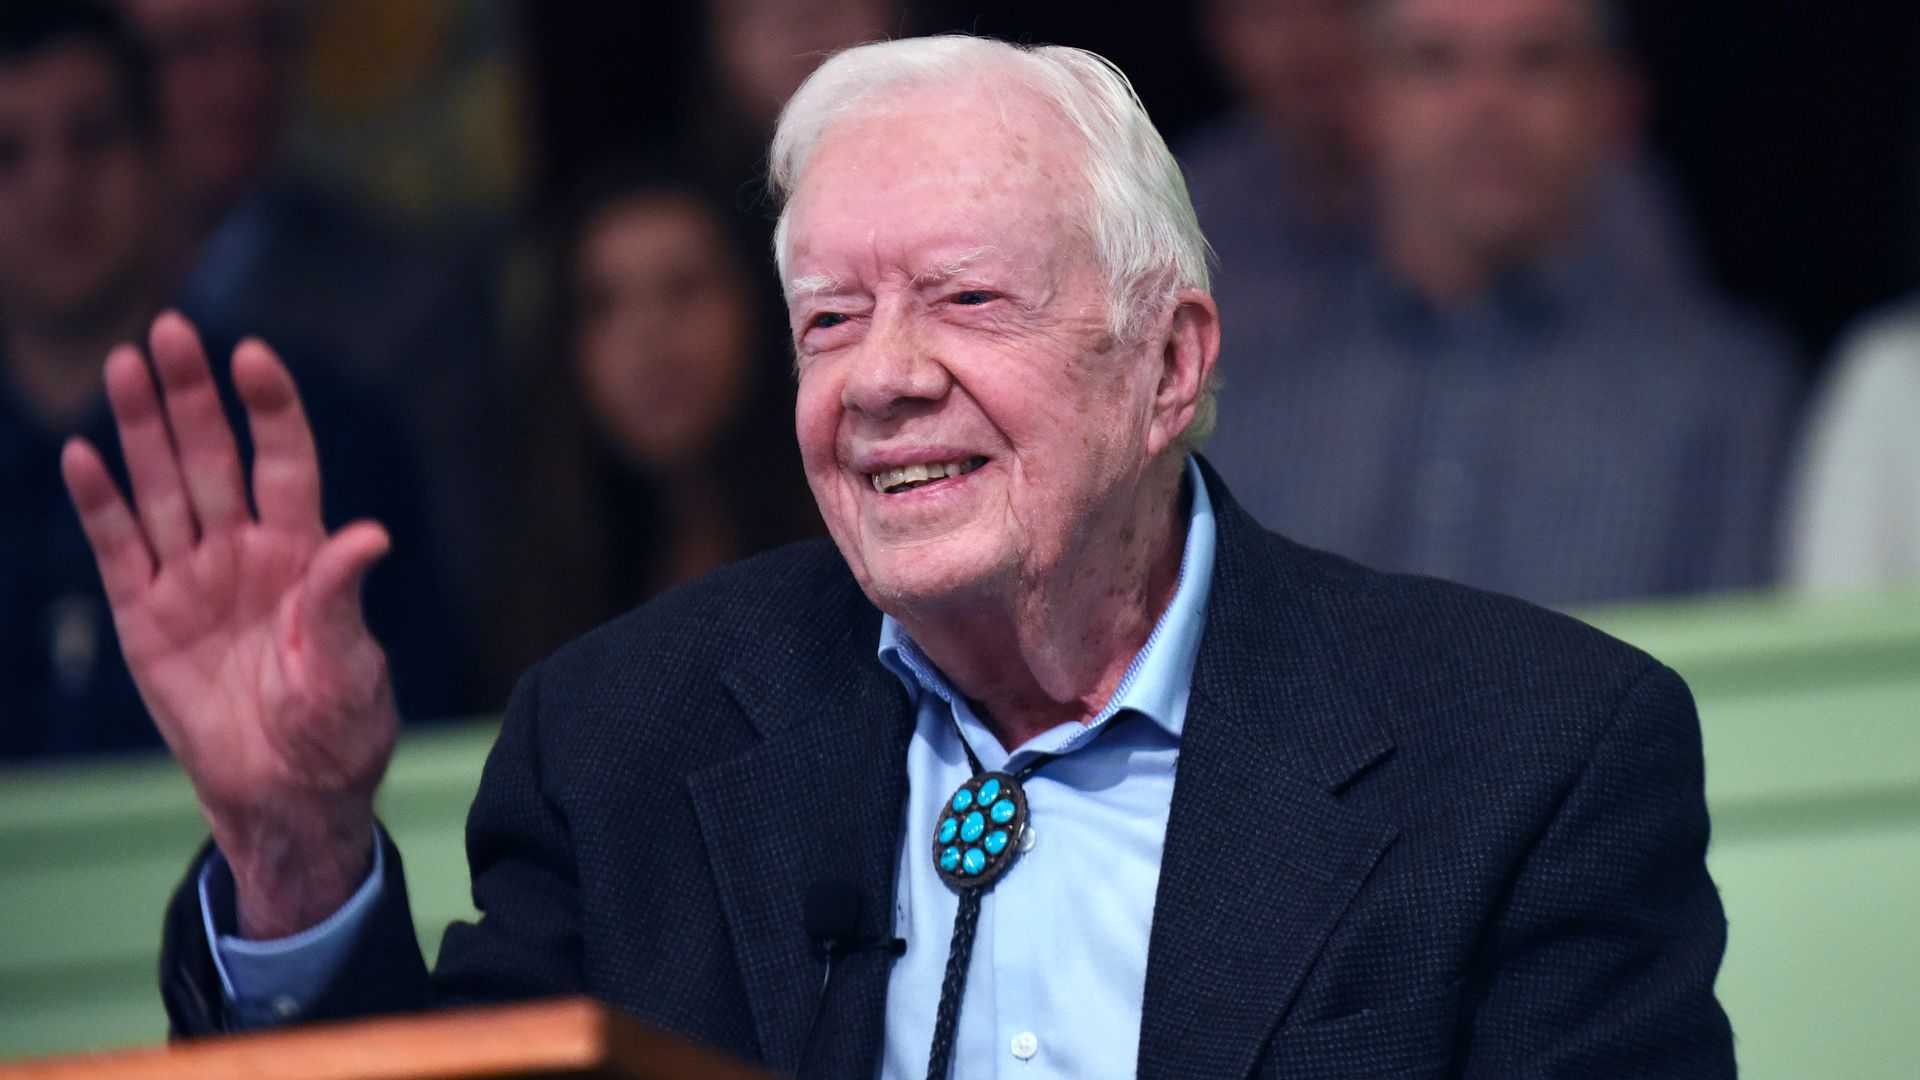 Jimmy Carter at his church waving to people.